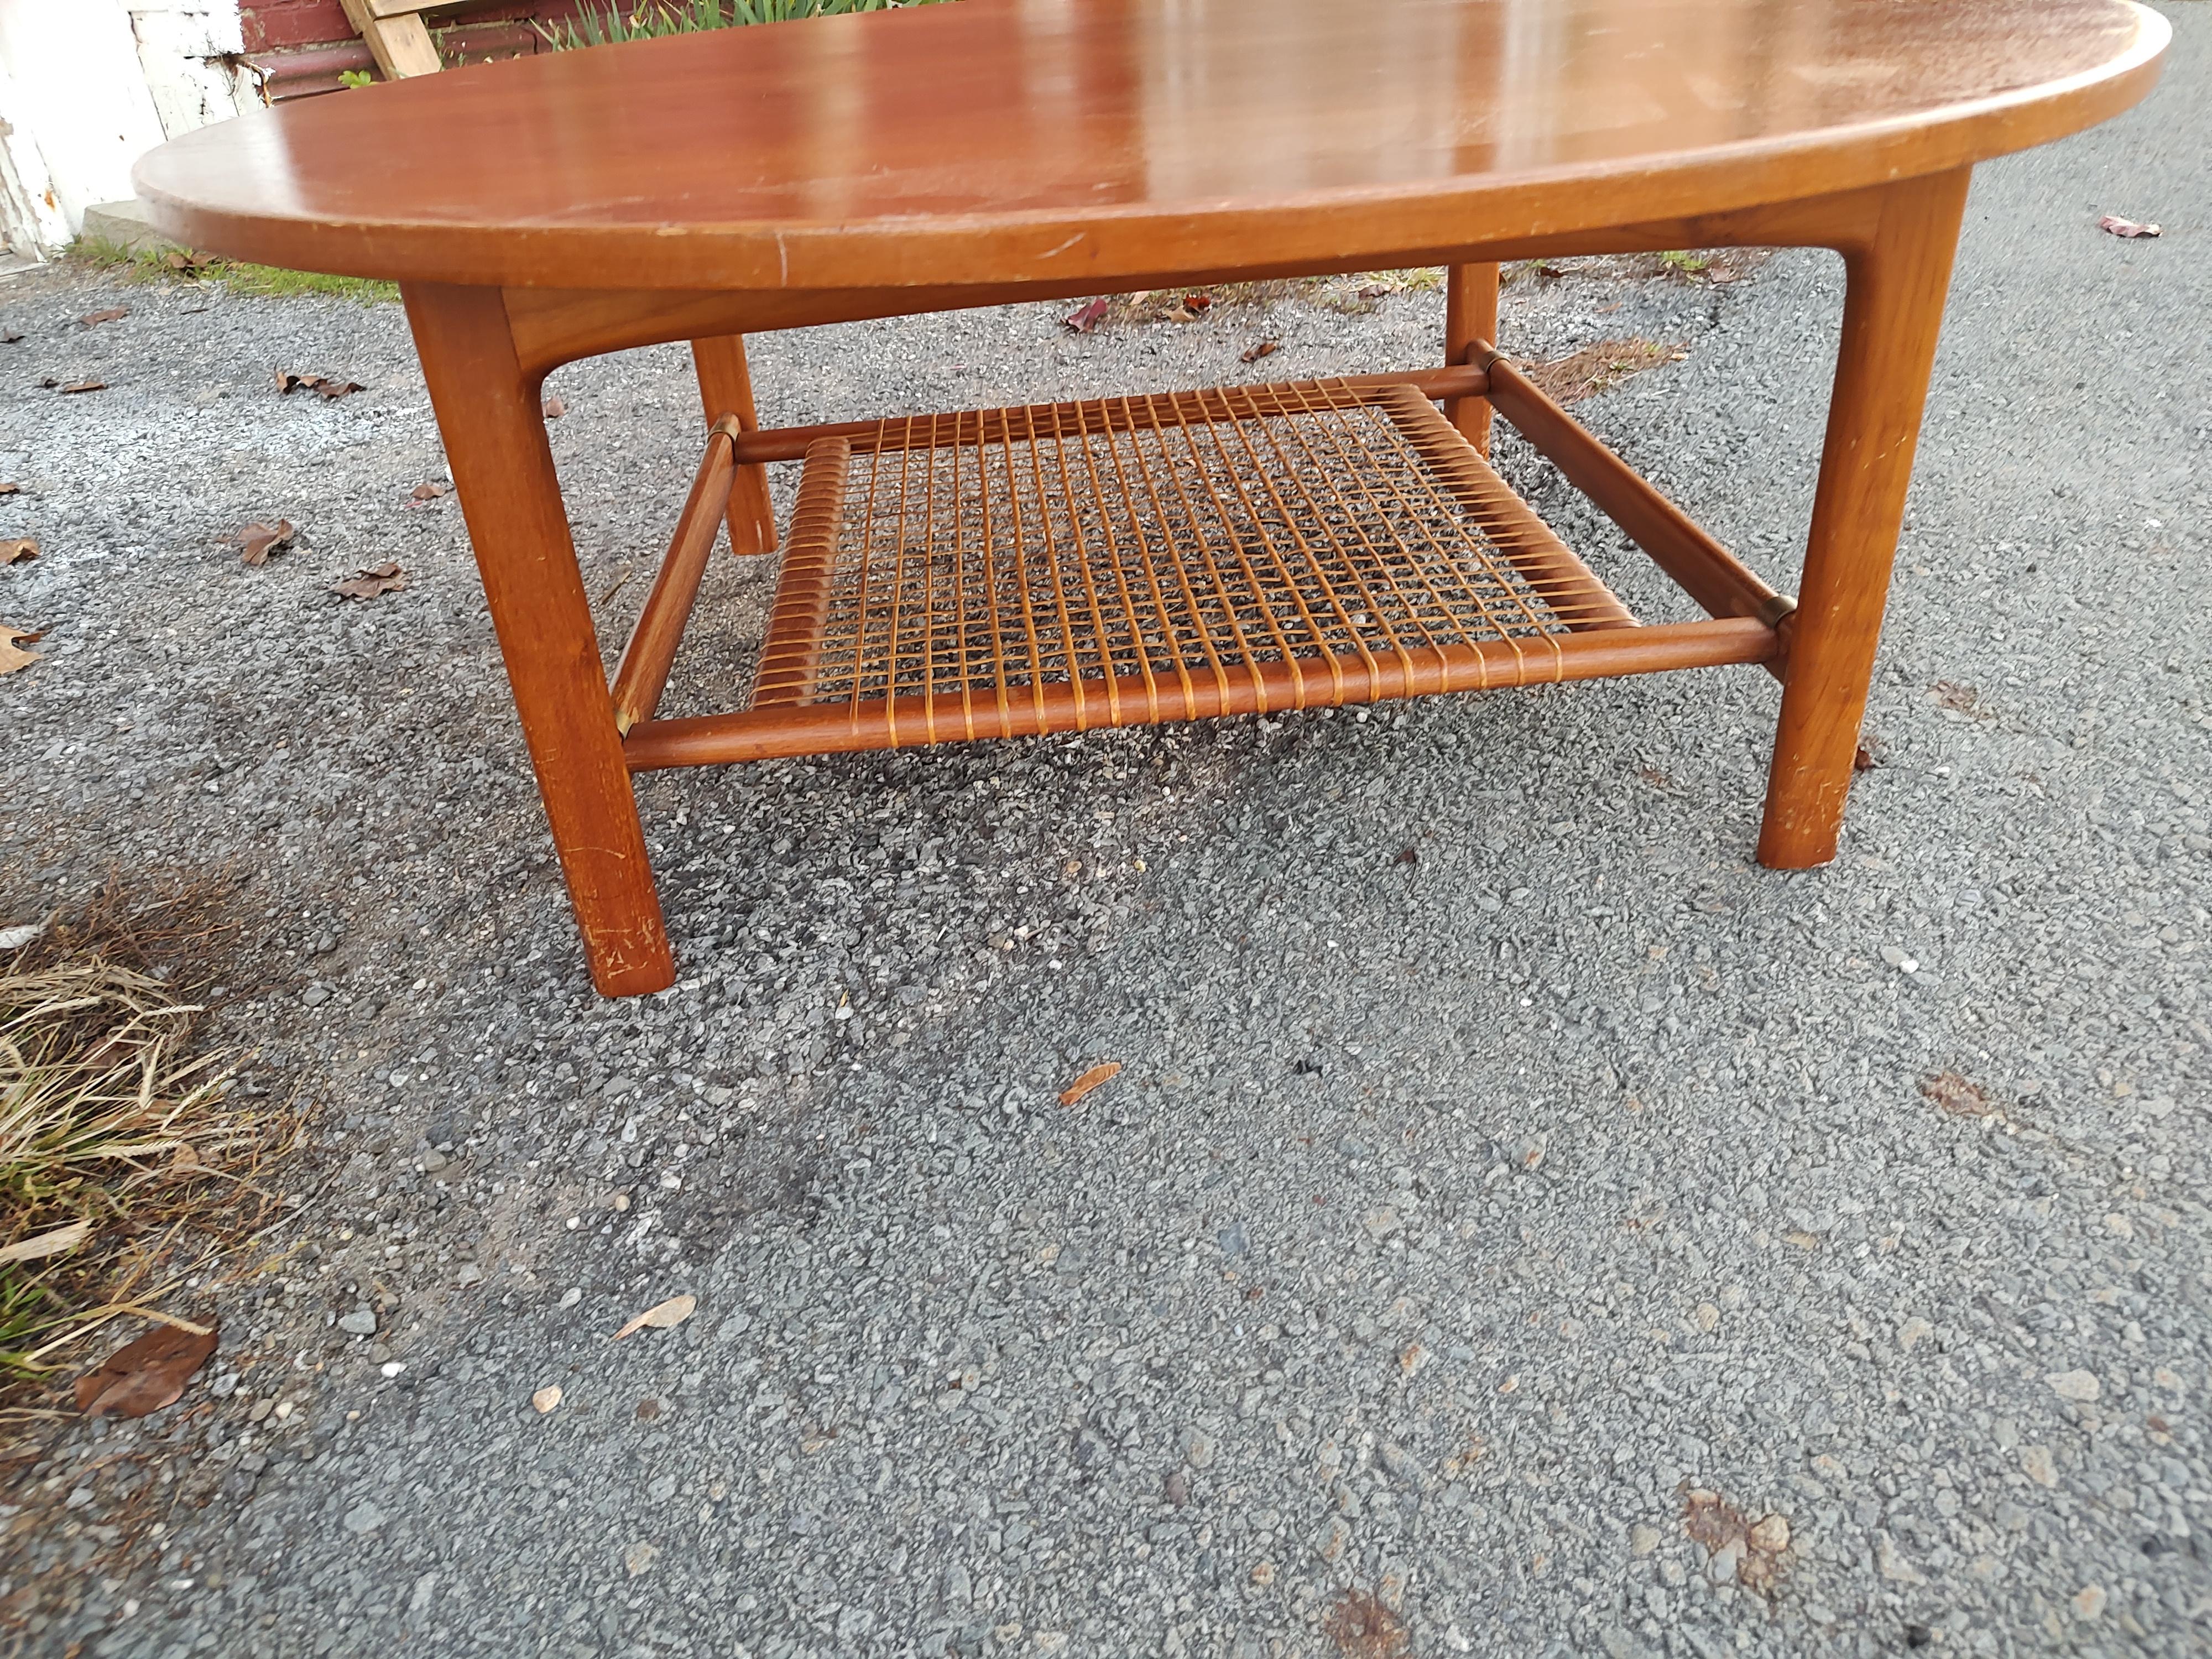 Brass Mid-Century Modern Teak with Woven Shelf Cocktail Table by Dux Sweden For Sale